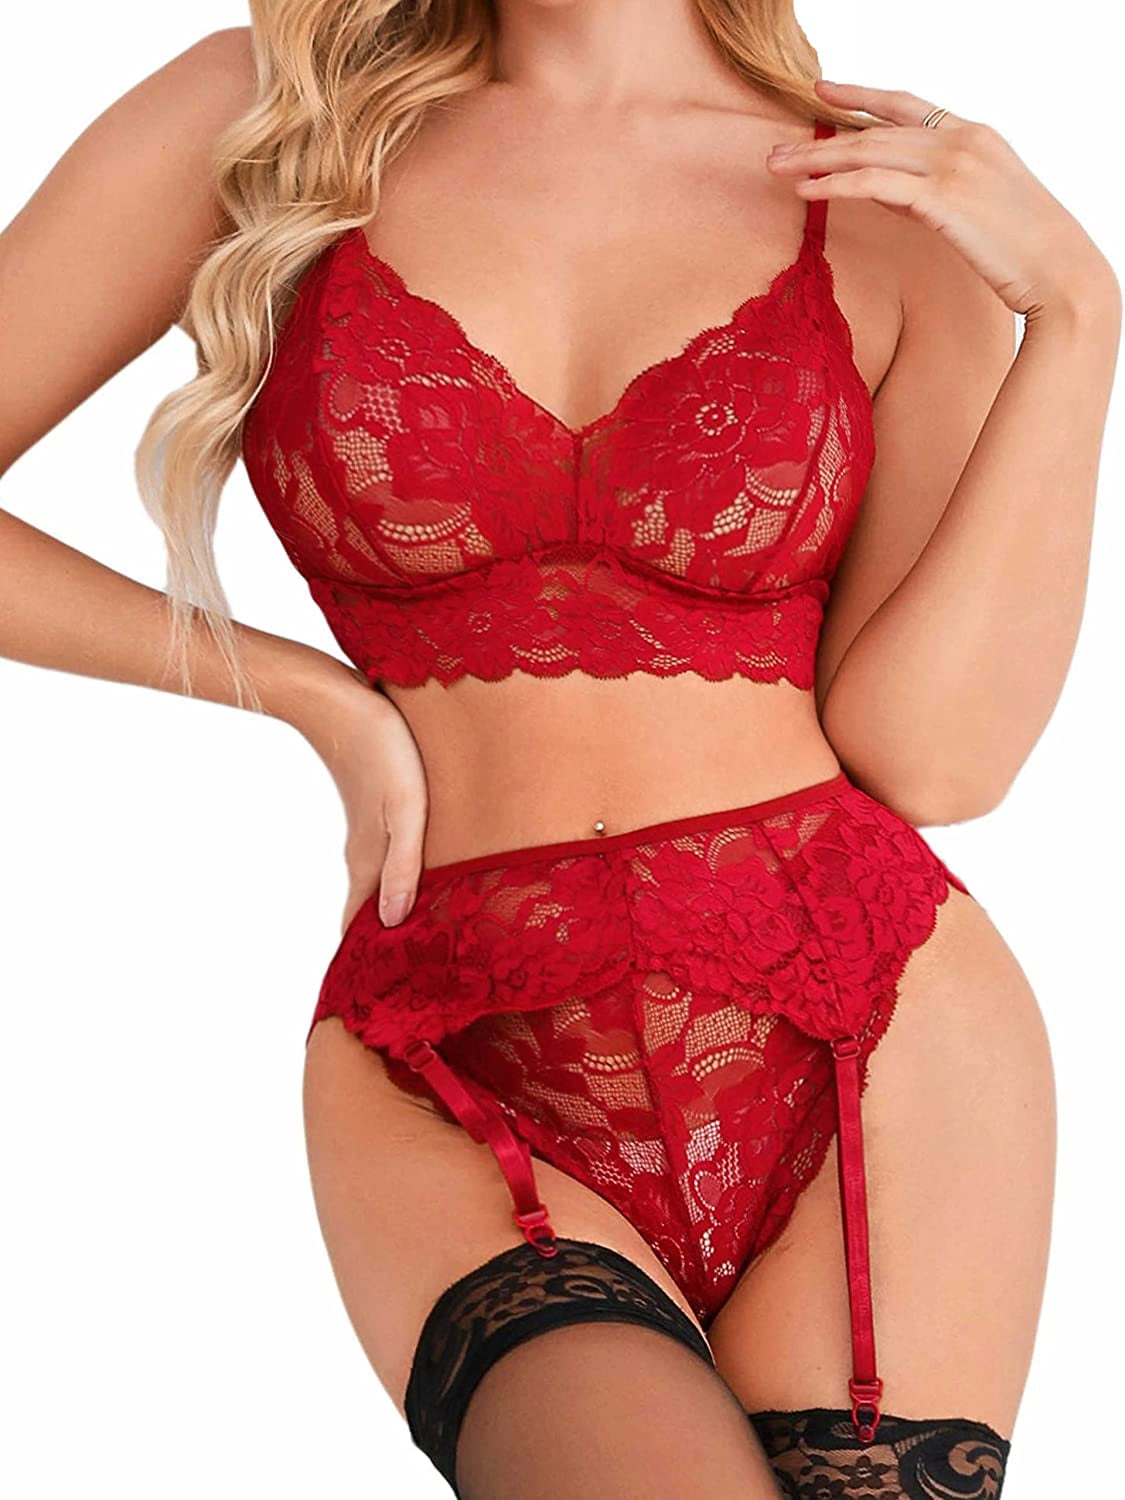 Sexy Lingerie Set for Women Naughty, 3 PC, Lace Bralette Bra and Panty Sets,  Garter Belt Lingerie 